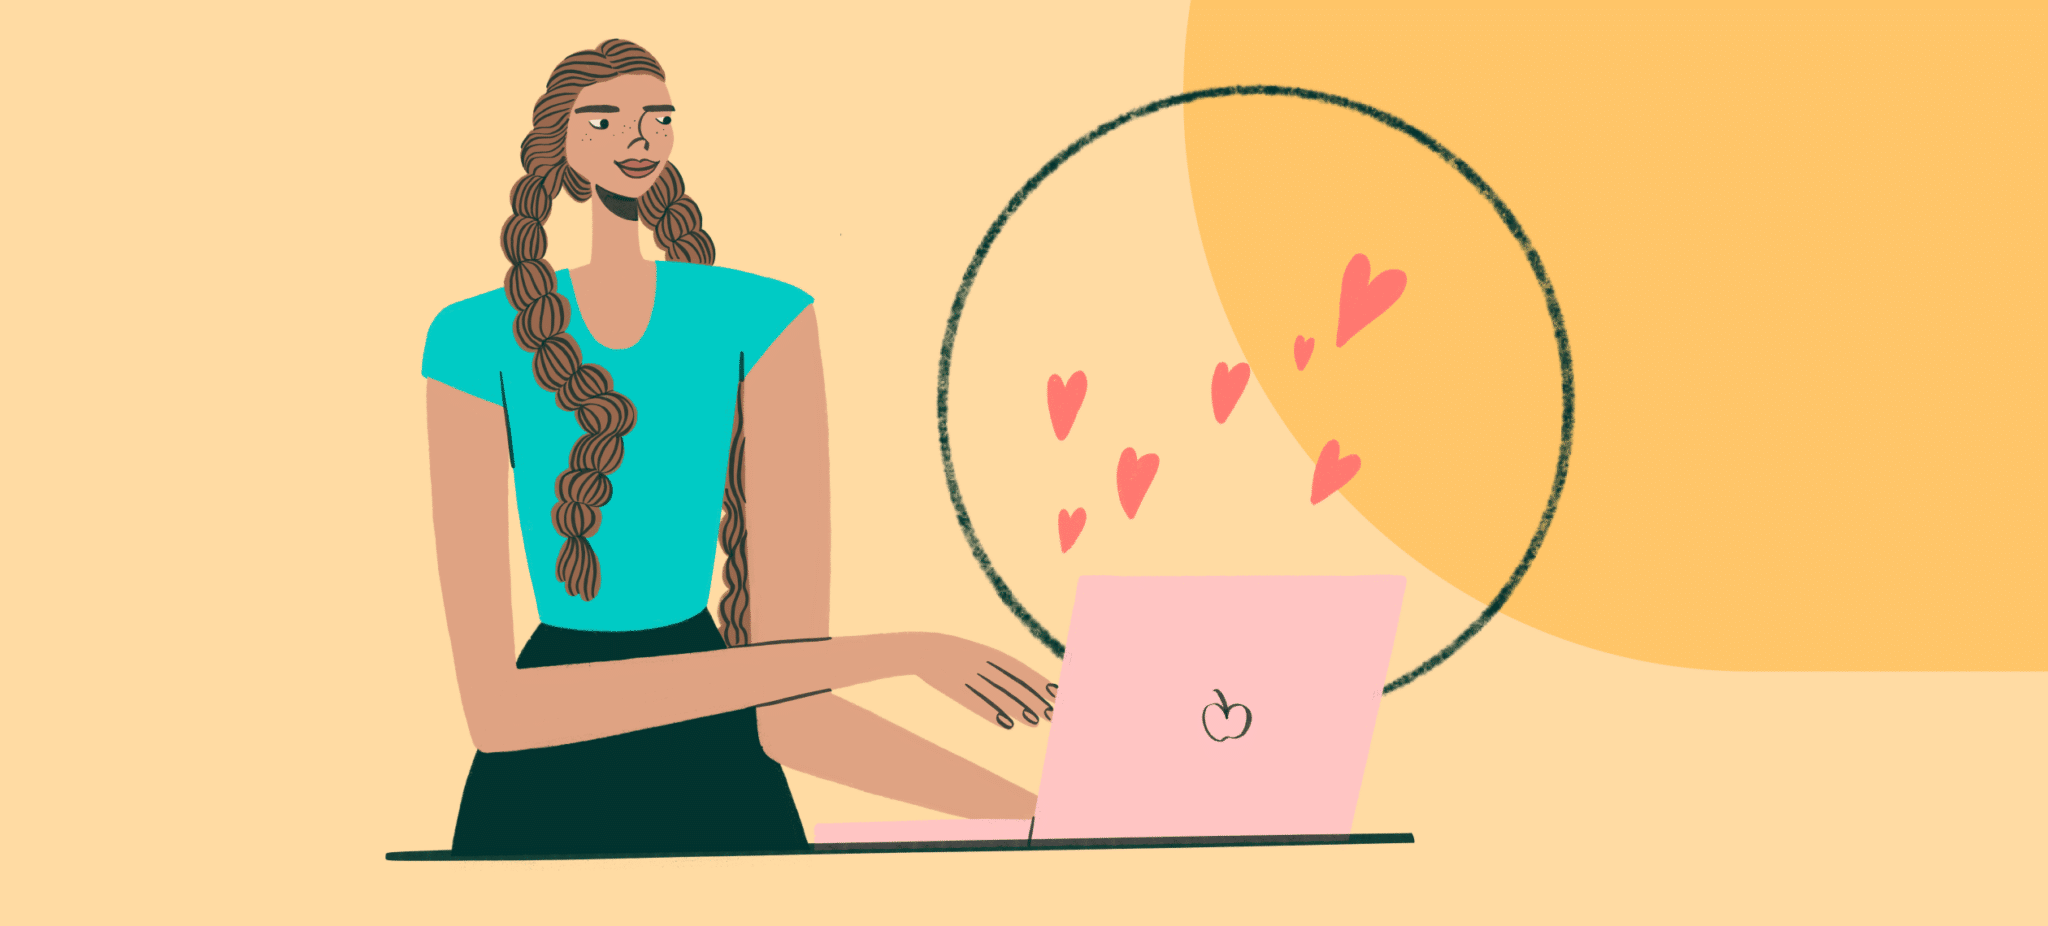 Illustration of woman working on a laptop